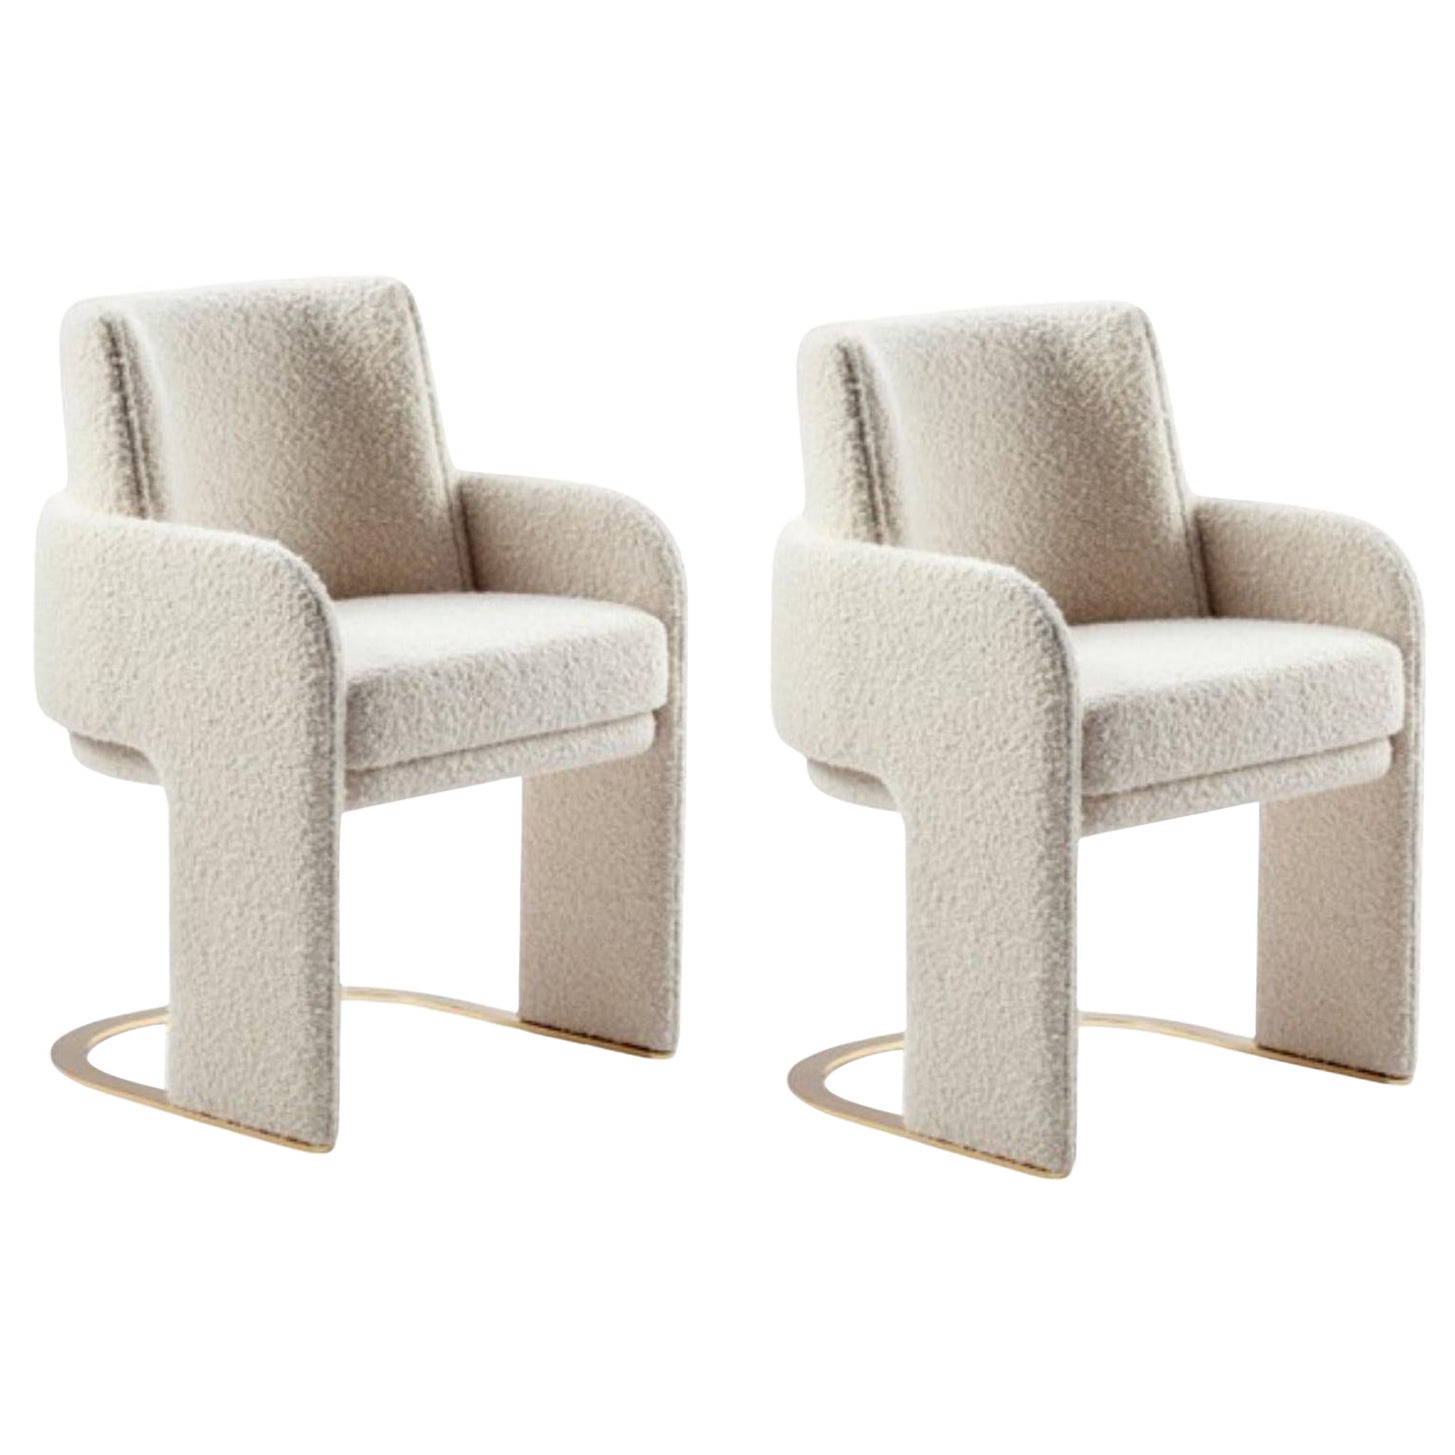 Set of 2 Bouclé Odisseia Chairs by Dooq For Sale